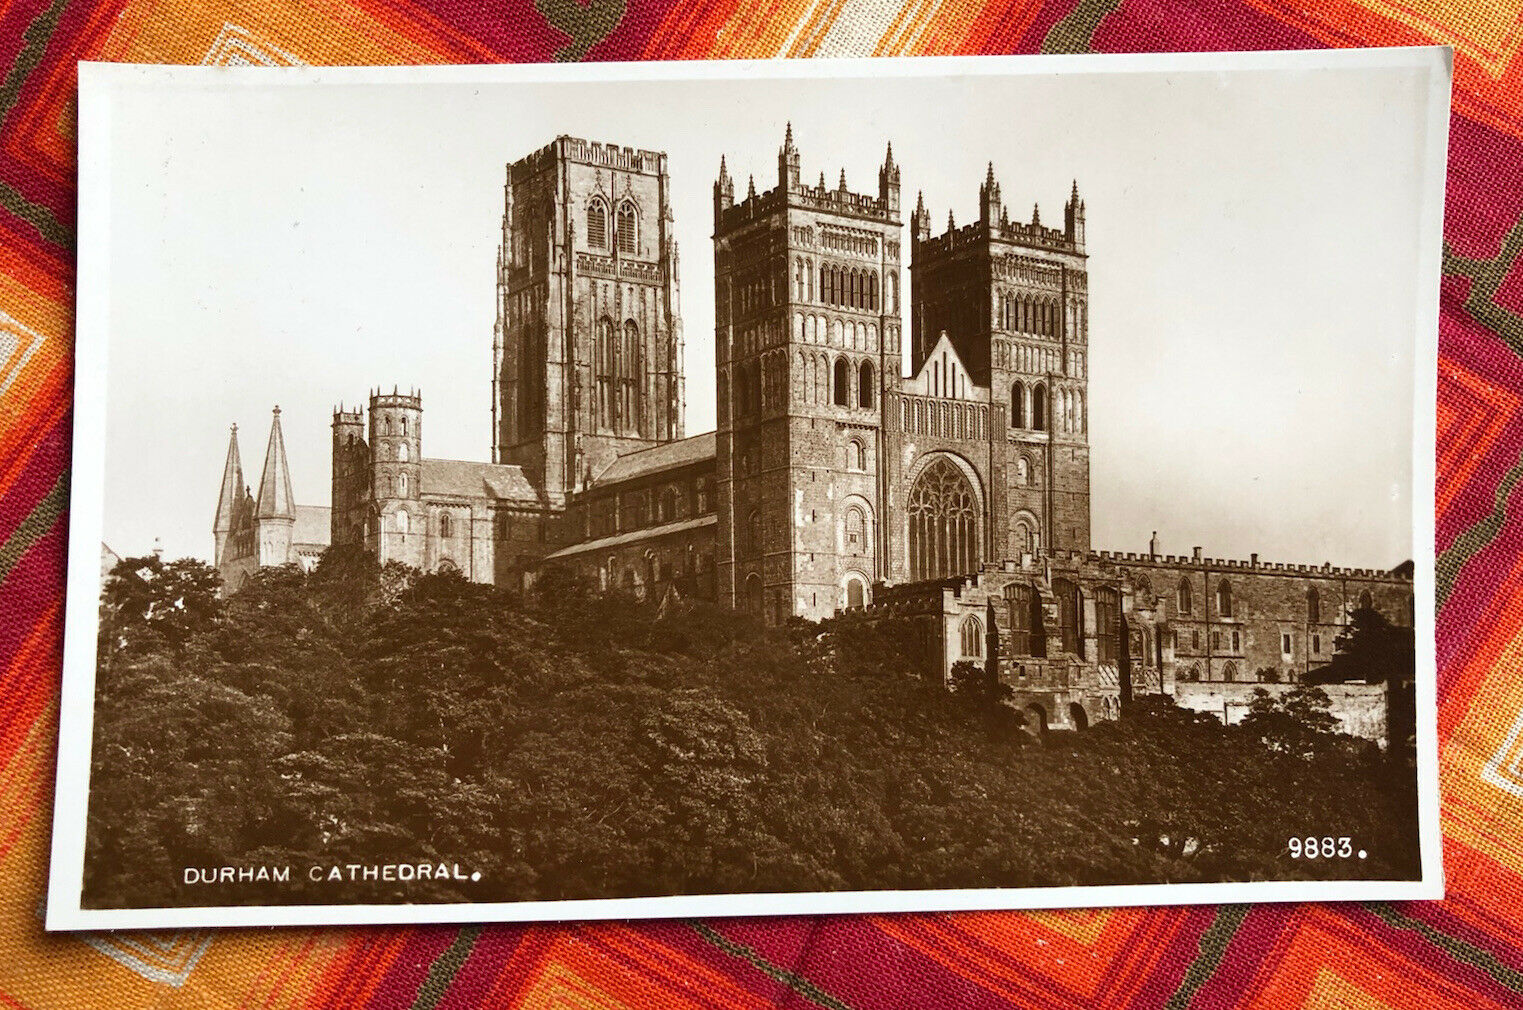 House Clearance - Durham Cathedral, Vintage service, Valentine’s